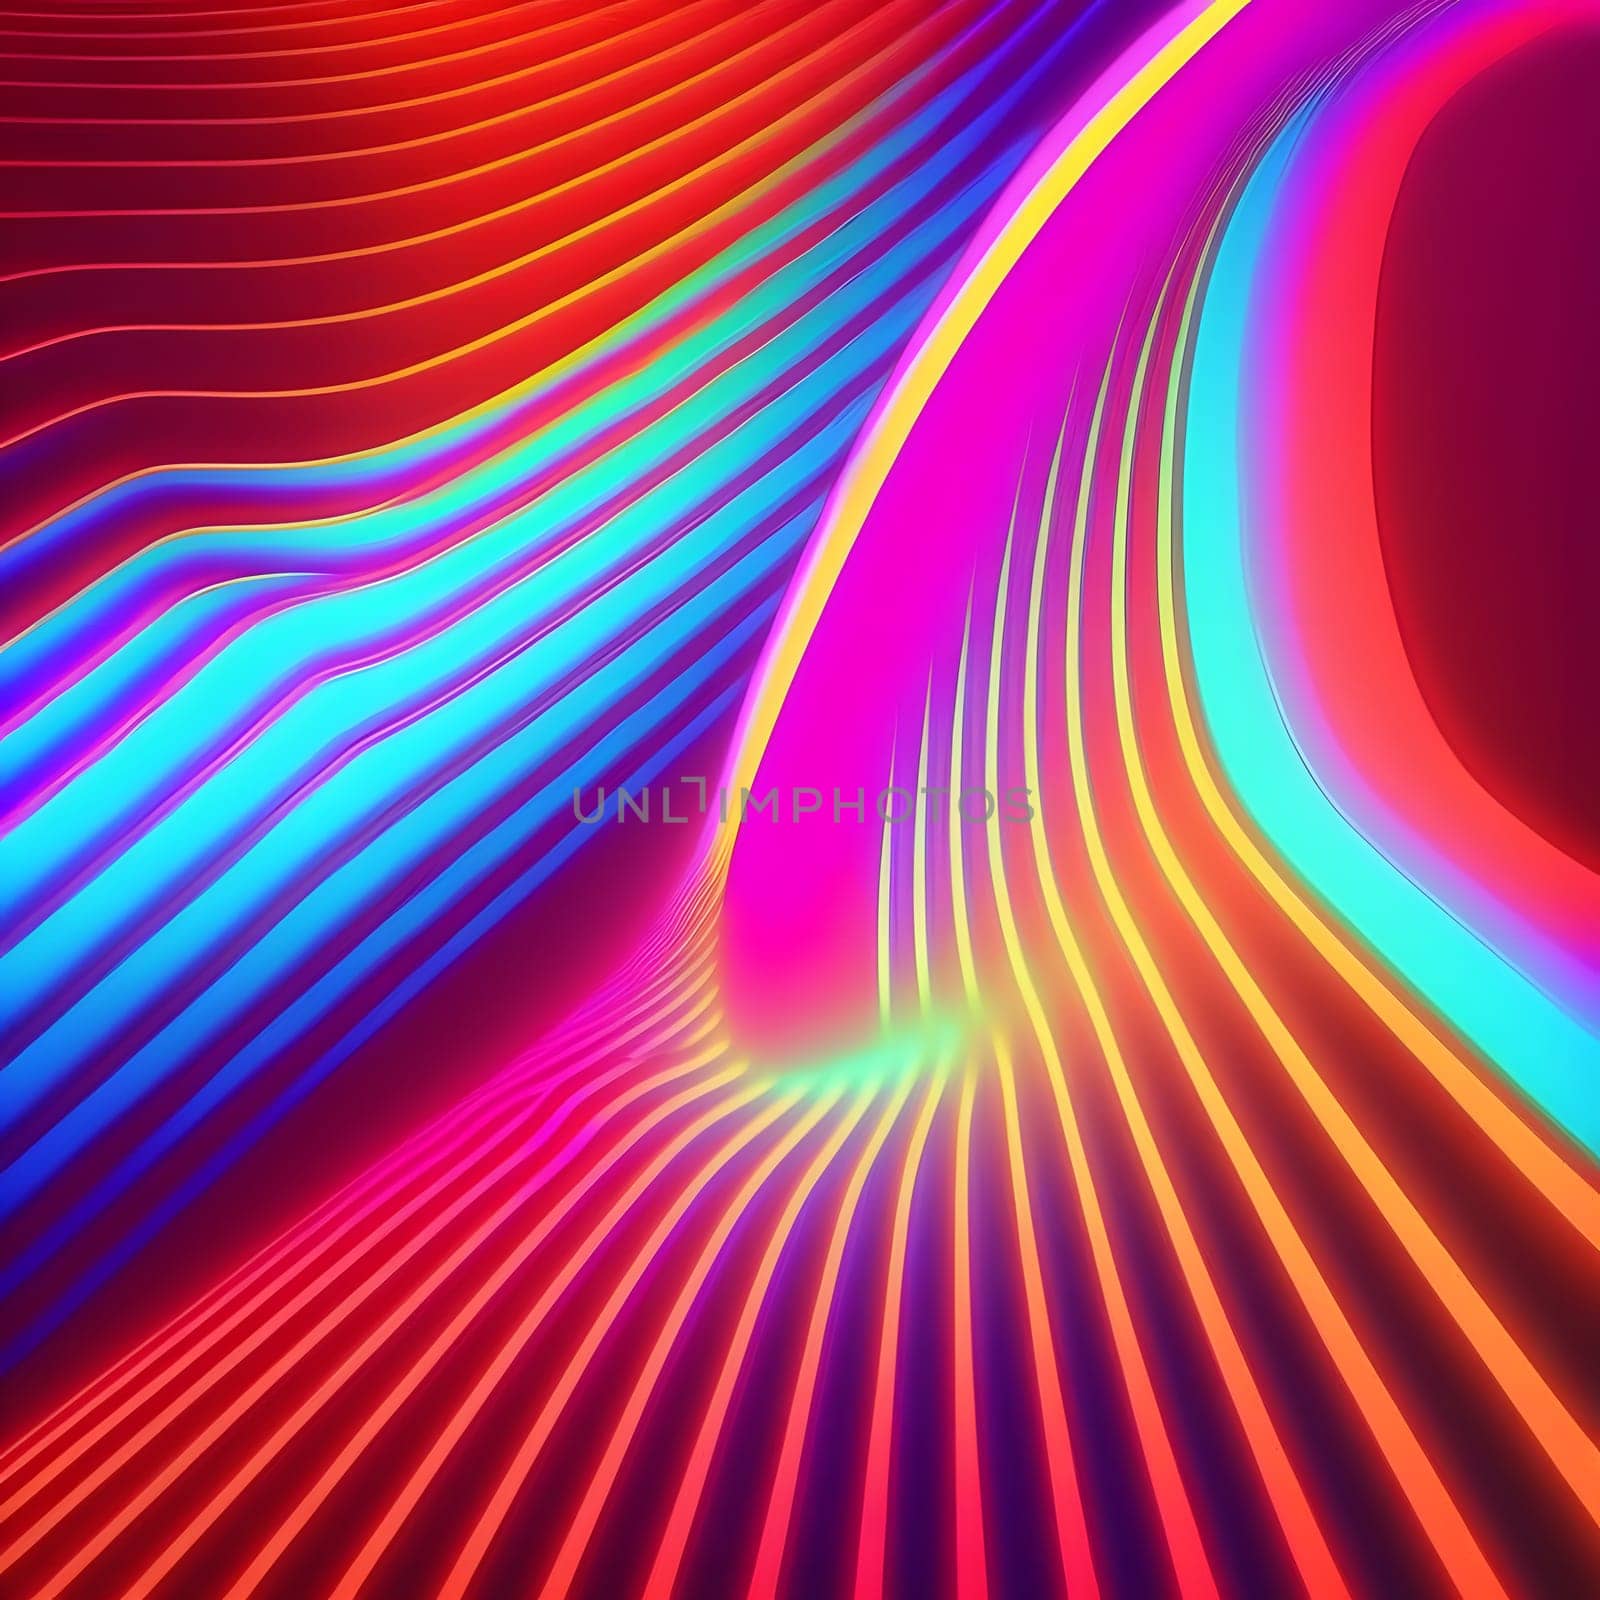 abstract colorful neon geometric lines background, neural network generated art. Digitally generated image. Not based on any actual scene or pattern.